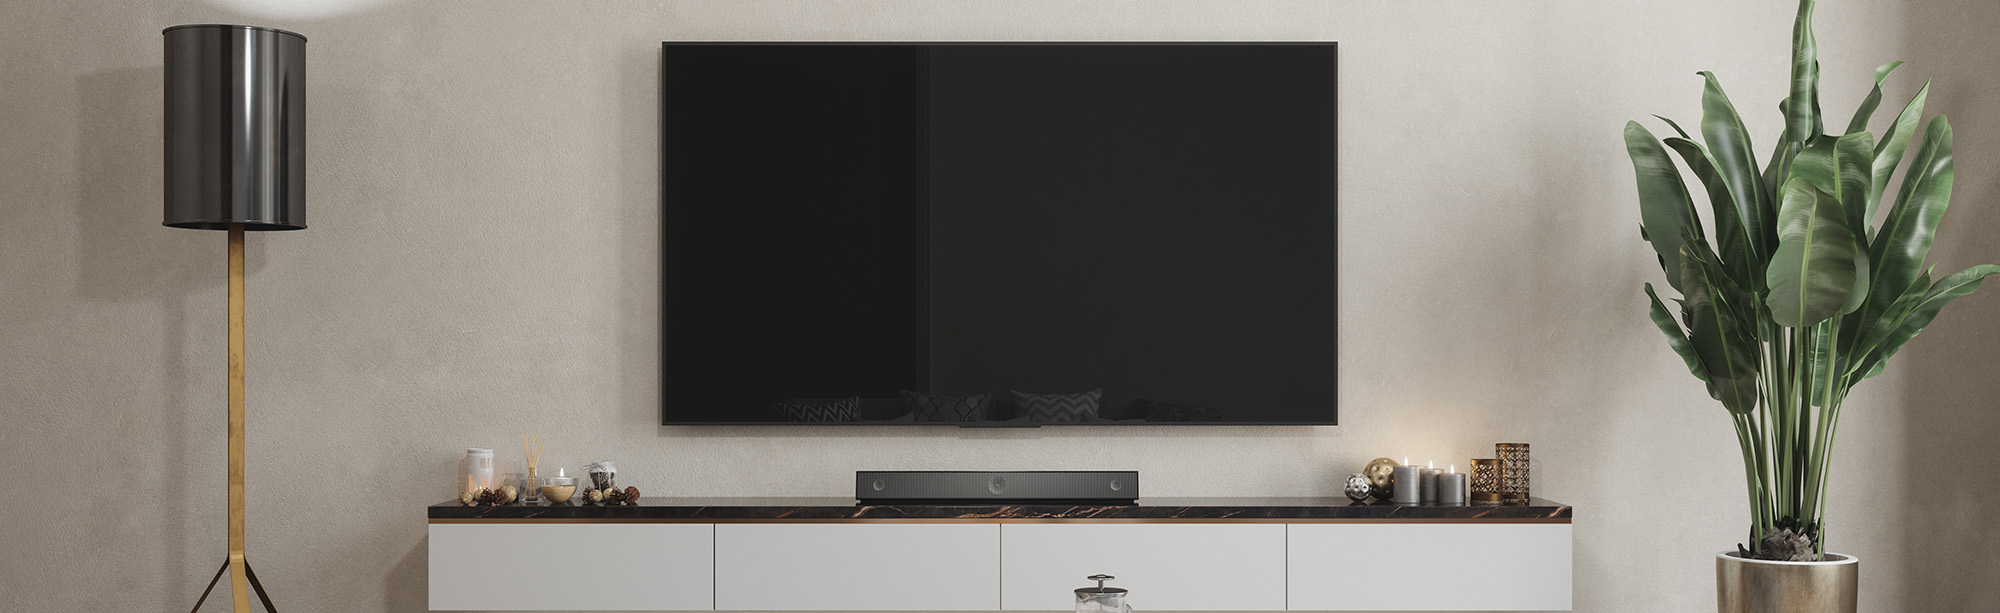 TV Mounting Services in Southeast Wisconsin